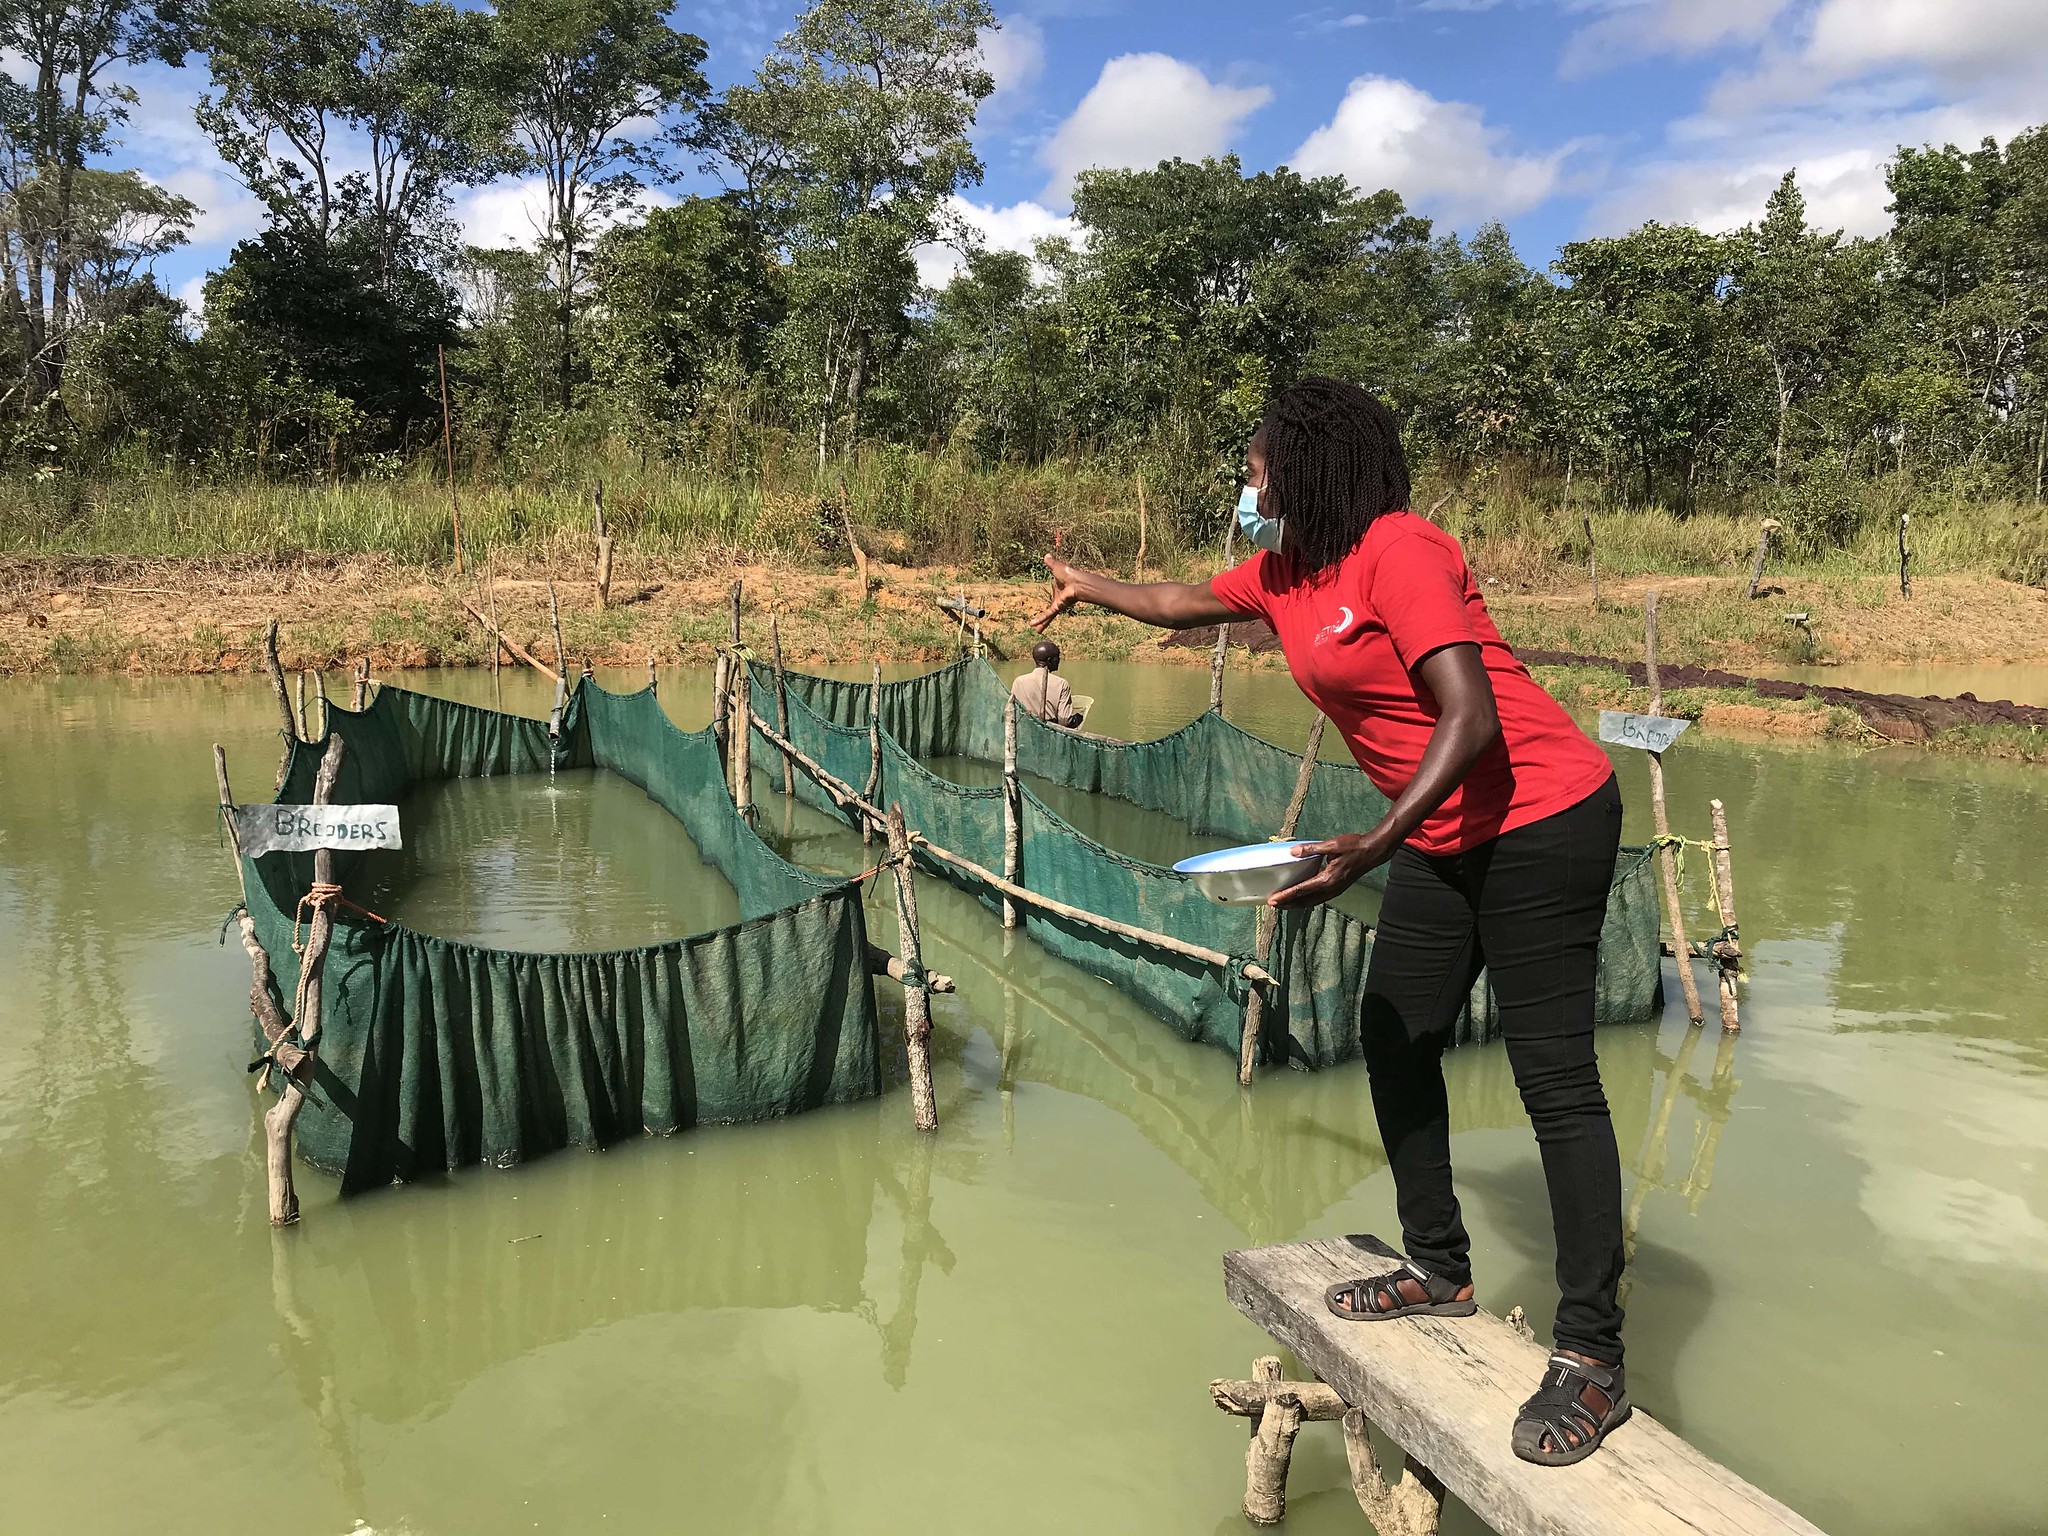 The project's ultimate goal is for 5,000 aquatic food producers who are directly or indirectly involved with it to get access to, try out, and use the sustainable local aquatic feeds. 